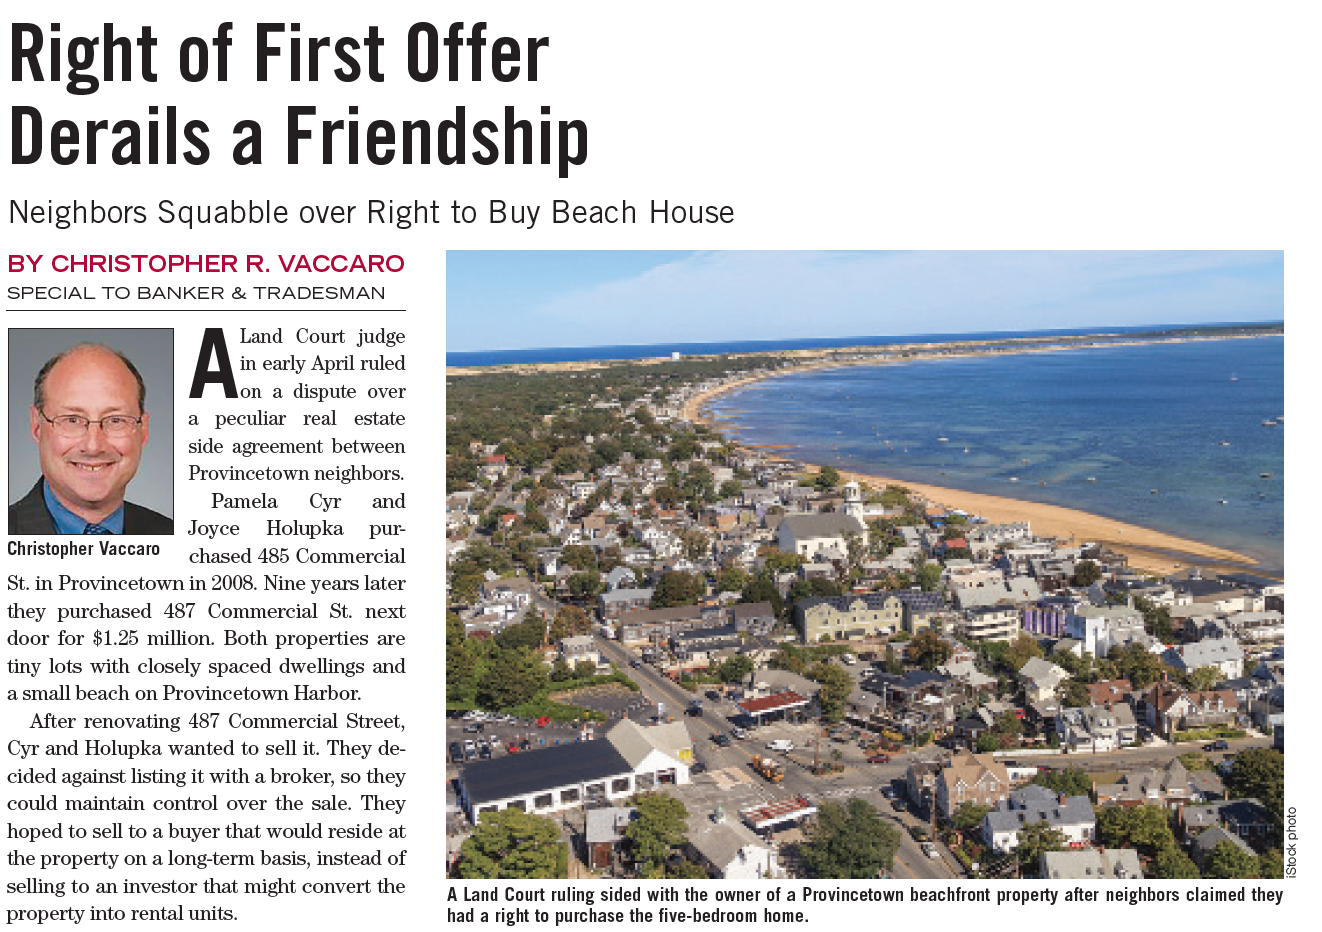 Right of First Offer Derails a Friendship